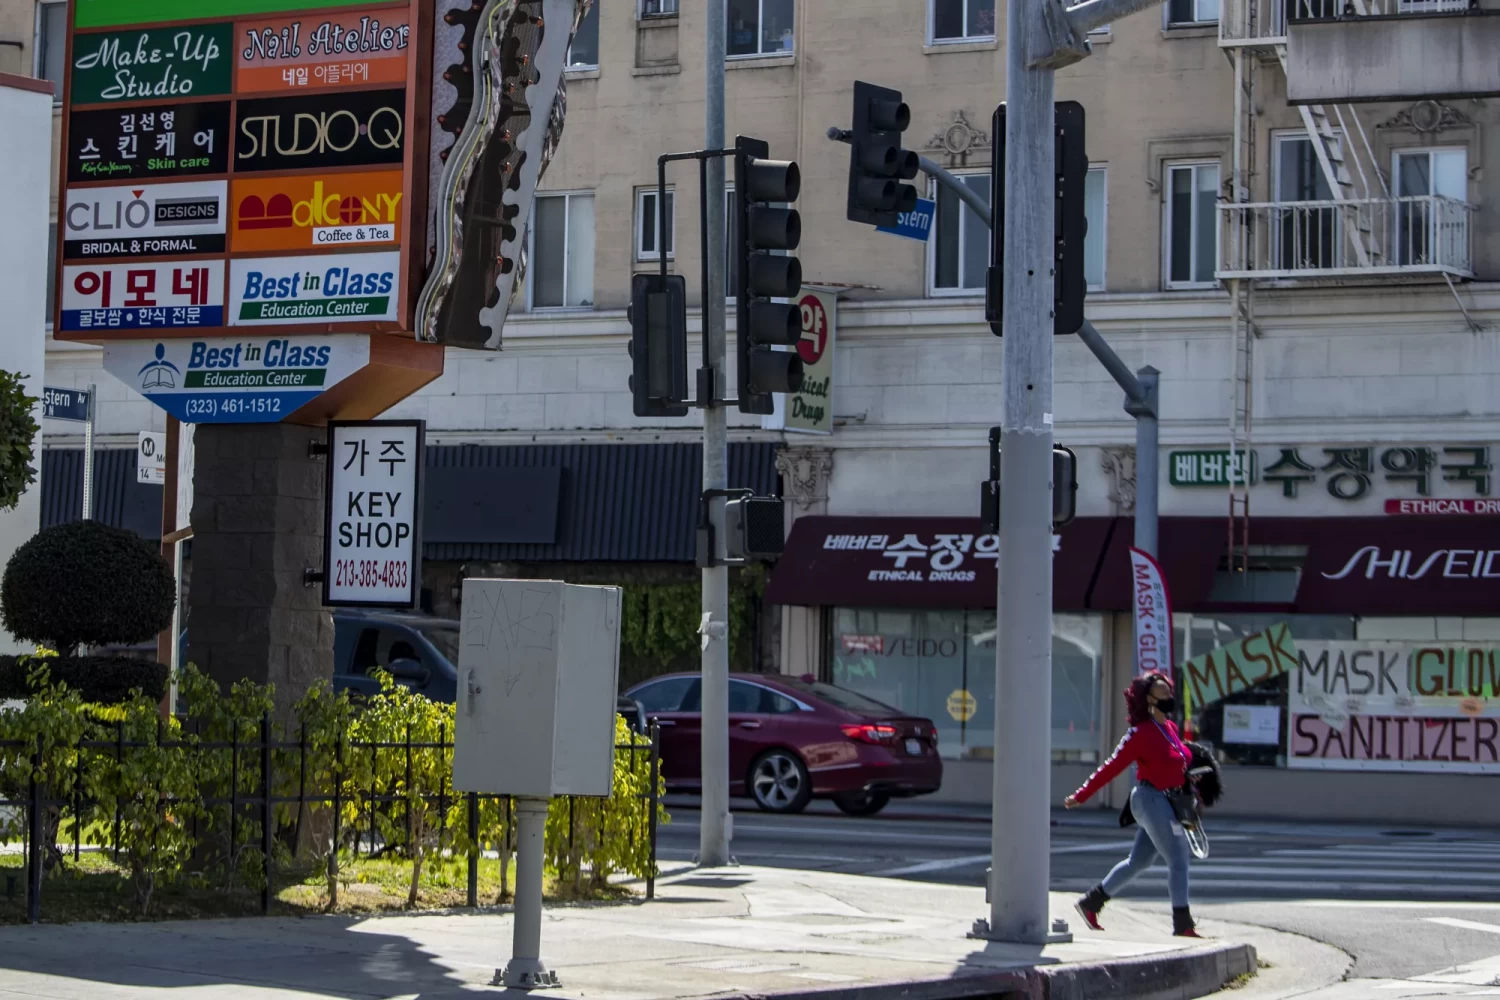 A block on Western Avenue in Koreatown, among many Los Angeles neighborhoods where development has pushed up home prices. (Brian van der Brug / Los Angeles Times)